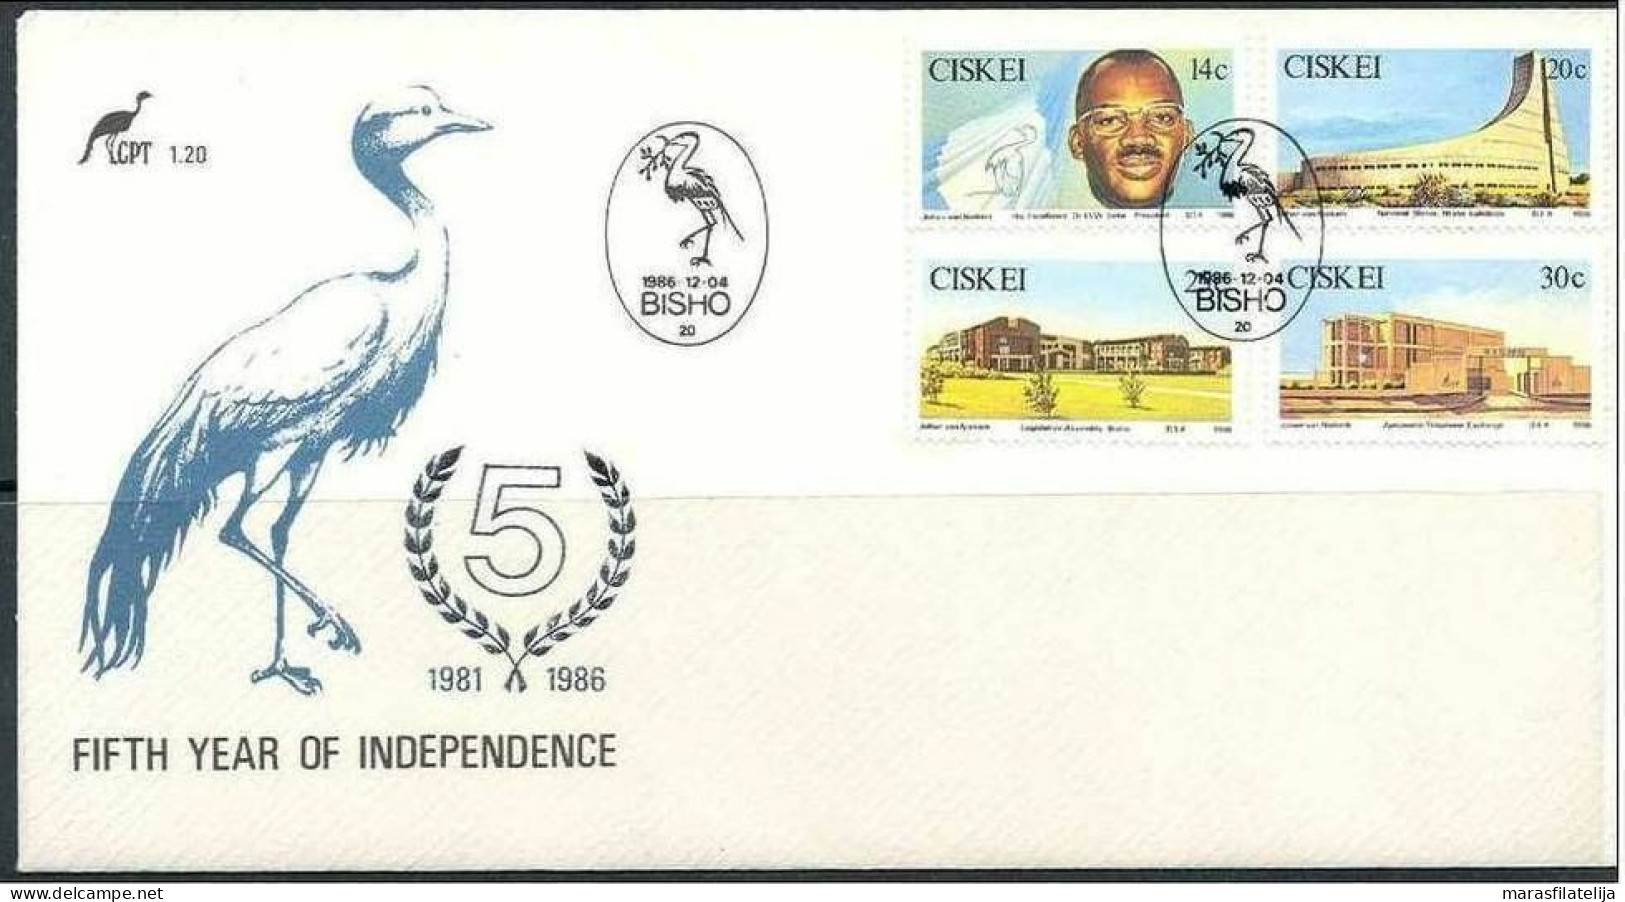 Ciskei 1986, Fifth Year Of Independence, FDC - Ciskei